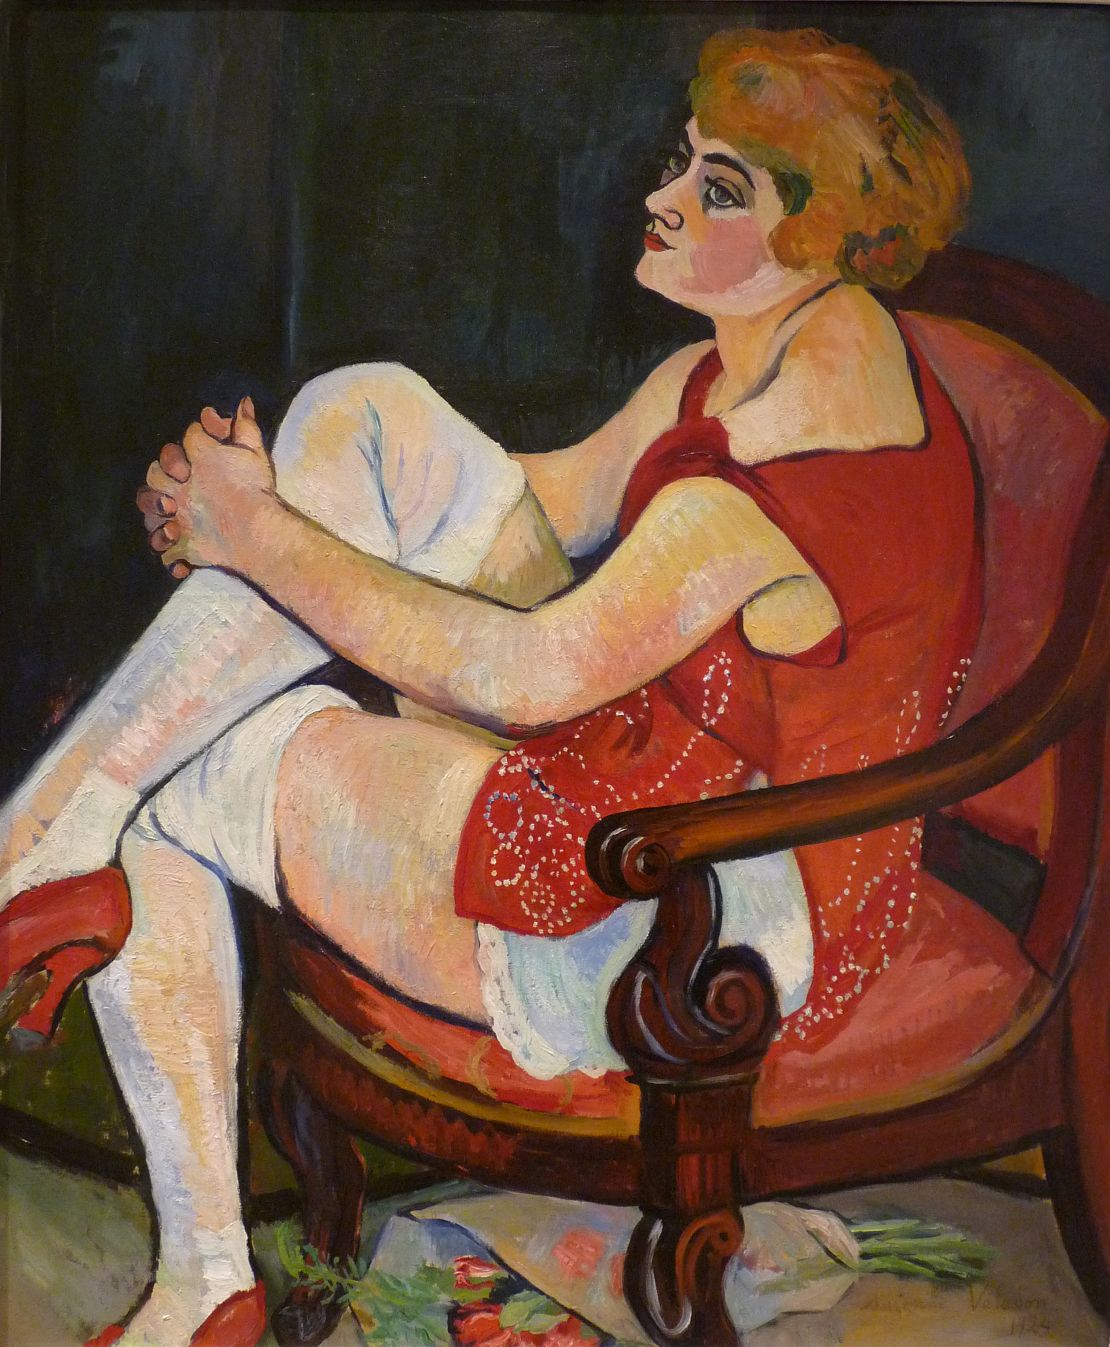 In Valadon's first showing at the prestigious Salon de la Société Nationale des Beaux-Arts in 1894, for a series of drawings, her listed name, "Valadon, S.," did not reveal her gender. Pictured: "Woman in White Stockings," 1924.